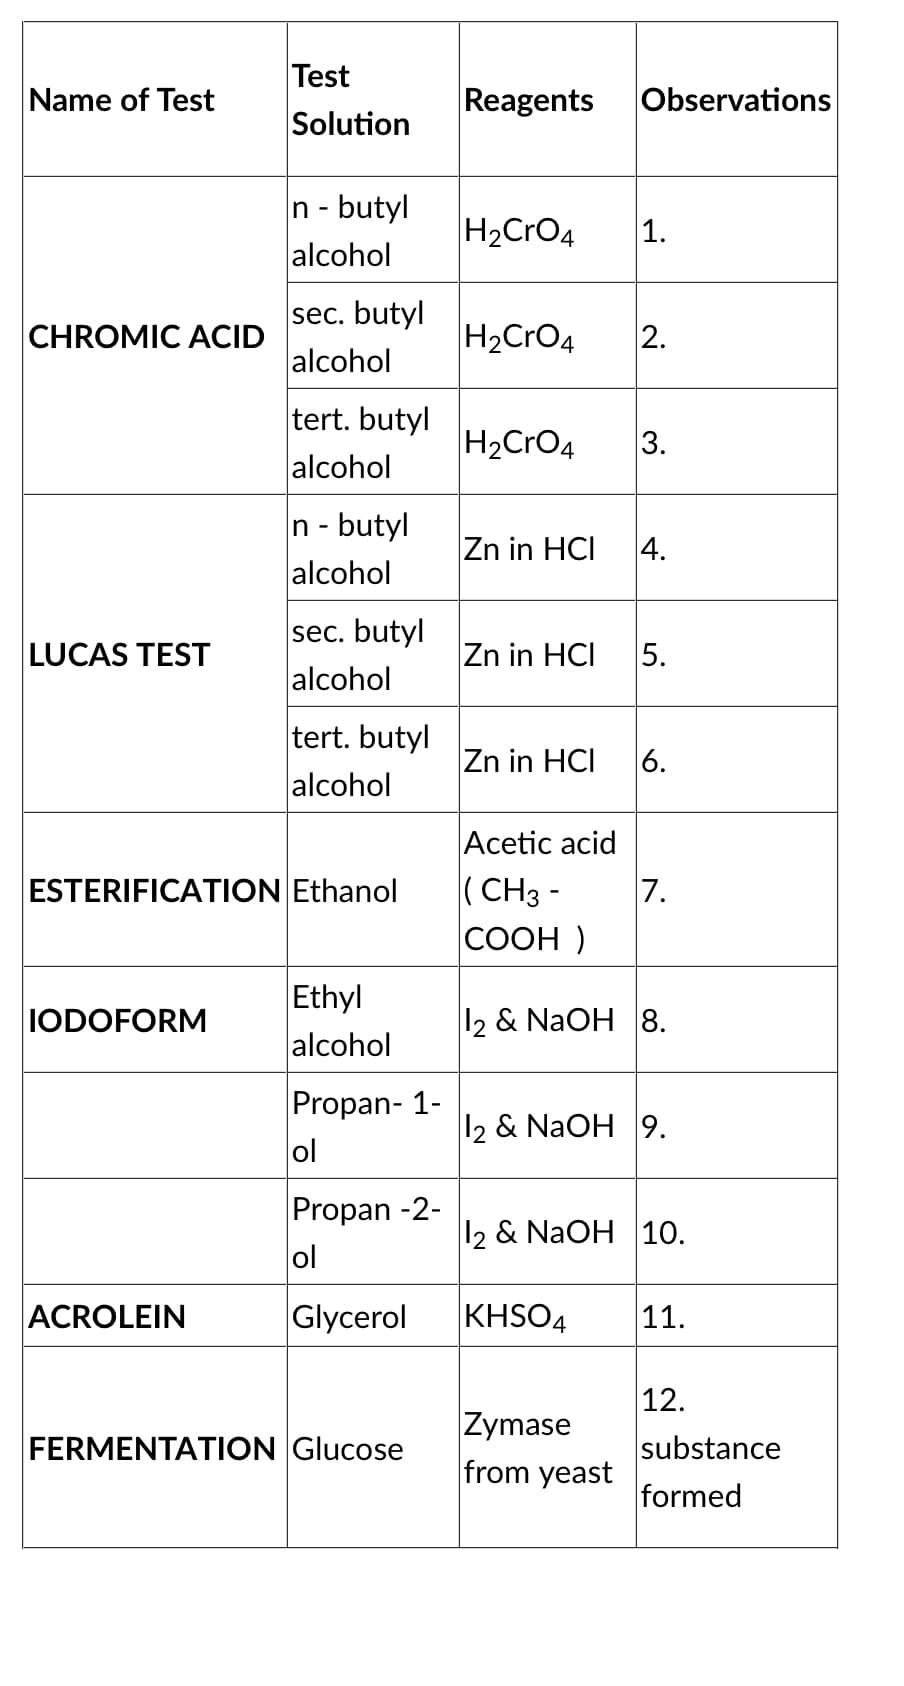 Test
Name of Test
Reagents
Observations
Solution
n - butyl
alcohol
H2CrO4
1.
sec. butyl
alcohol
H2CrO4
CHROMIC ACID
2.
tert. butyl
alcohol
H2CrO4
n - butyl
alcohol
Zn in HCI
4.
sec. butyl
LUCAS TEST
Zn in HCI
5.
alcohol
tert. butyl
alcohol
Zn in HCI
6.
Acetic acid
ESTERIFICATION Ethanol
|(CH3 -
7.
COOH )
Ethyl
alcohol
IODOFORM
12 & NaOH 8.
Propan- 1-
ol
12 & NaOH 9.
Propan -2-
ol
12 & NaOH 10.
ACROLEIN
Glycerol
KHSO4
11.
Zymase
from yeast
12.
substance
formed
FERMENTATION Glucose
3.
